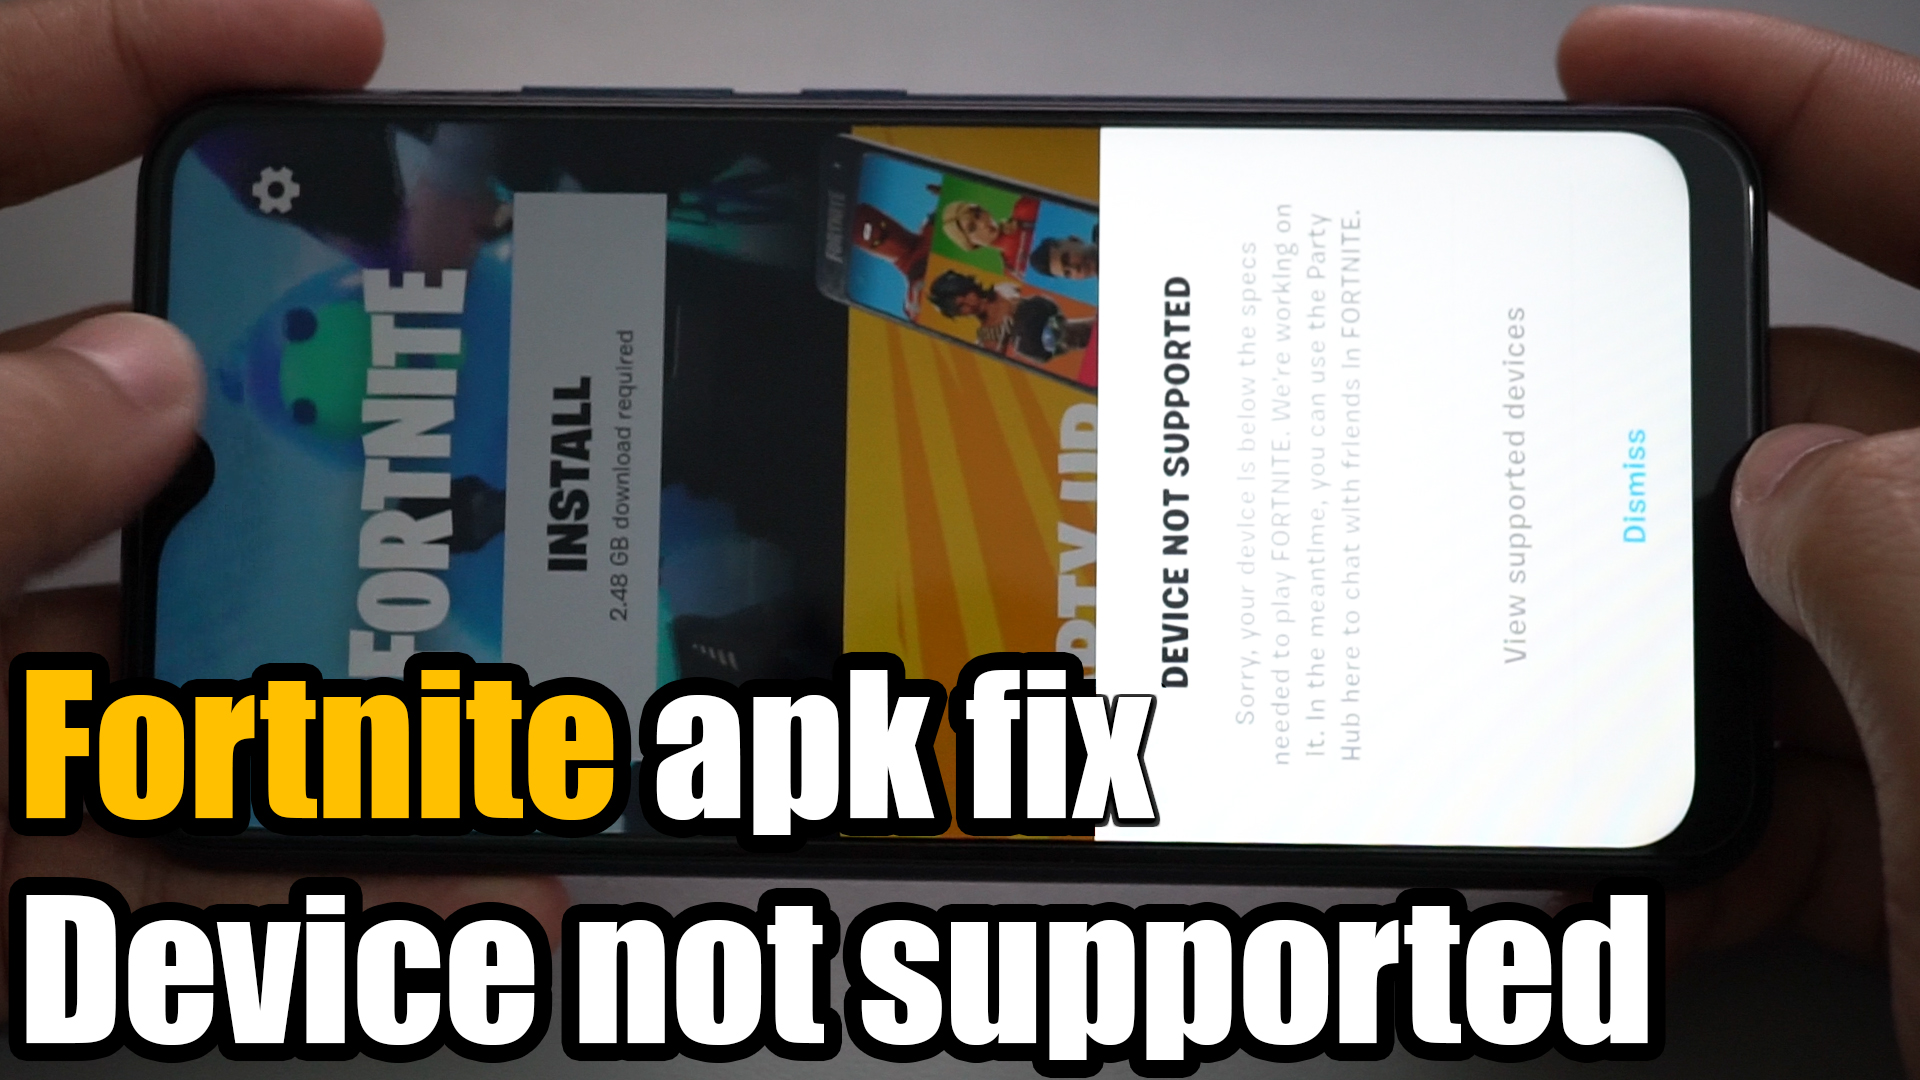 Your device not supported. Device not support.